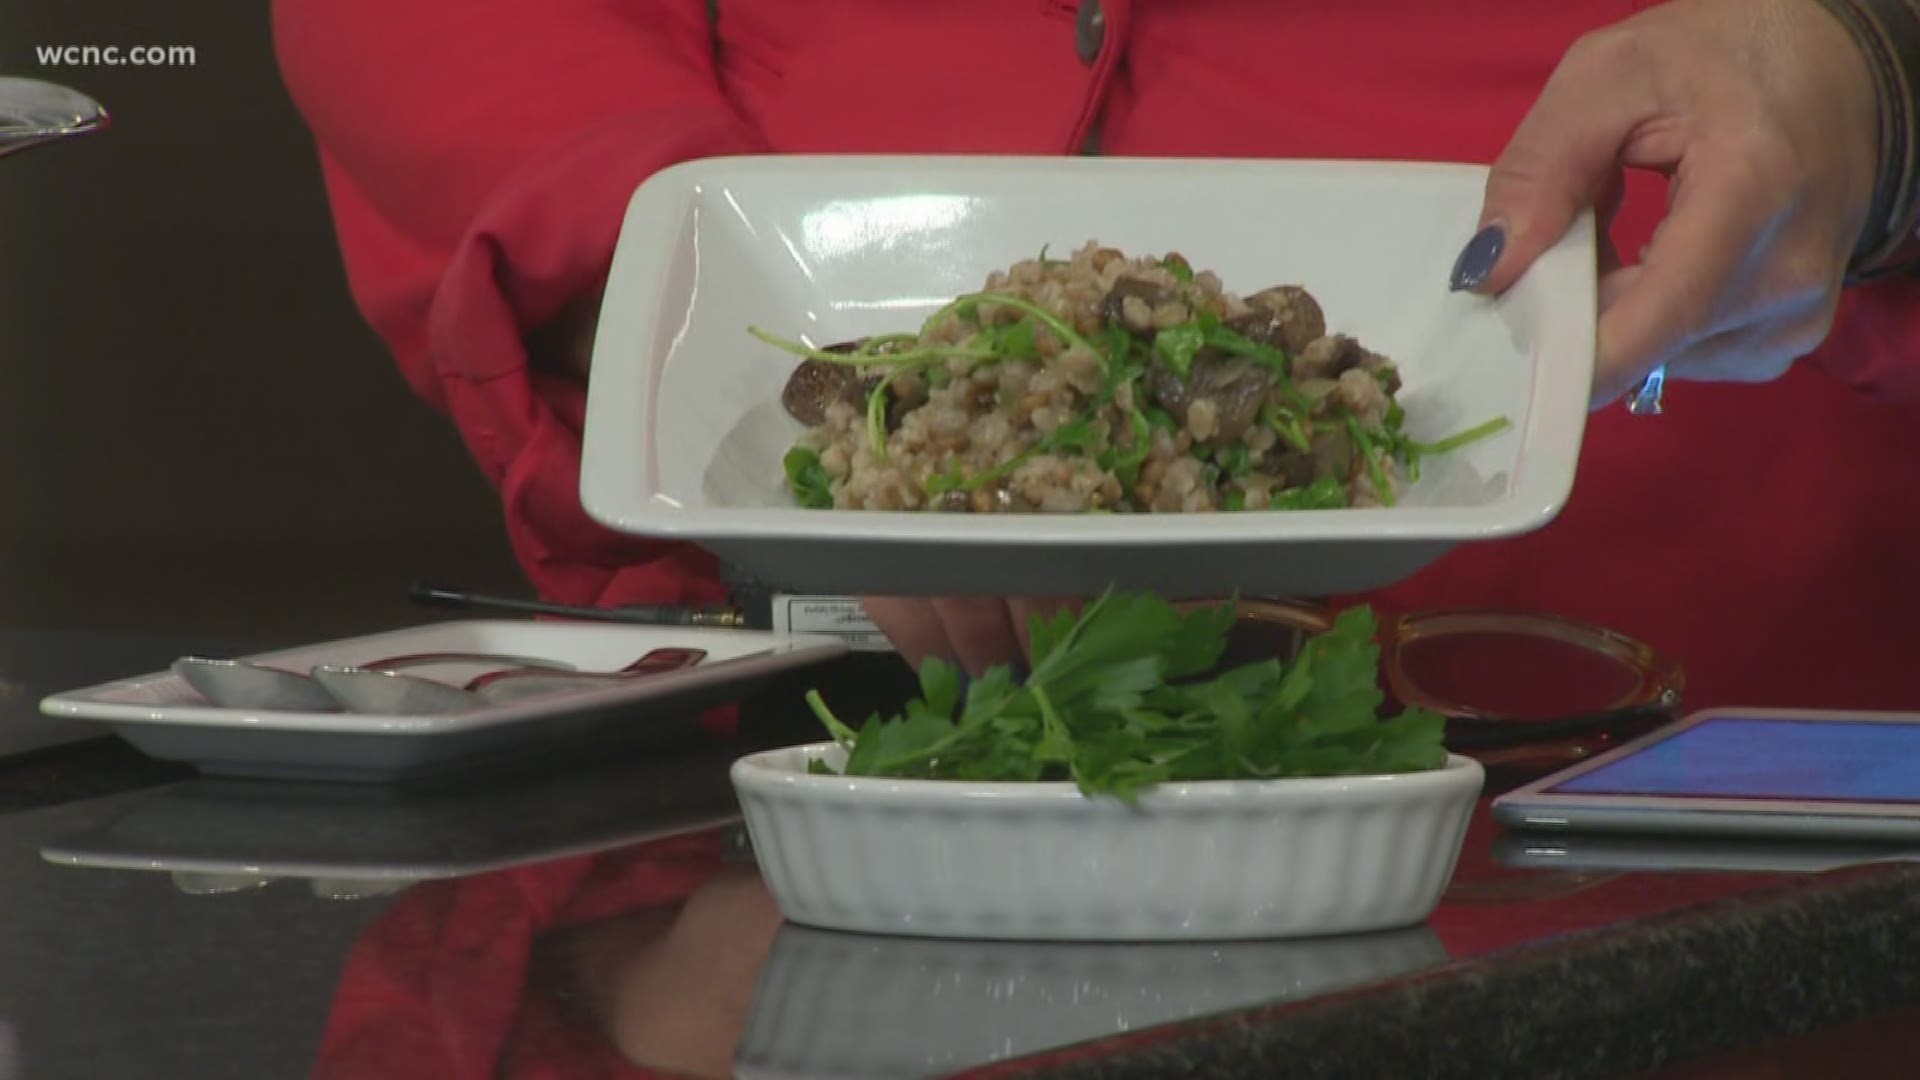 Culinary instructor Ashley McGee shows us how to make a hearty, vegetarian dish.